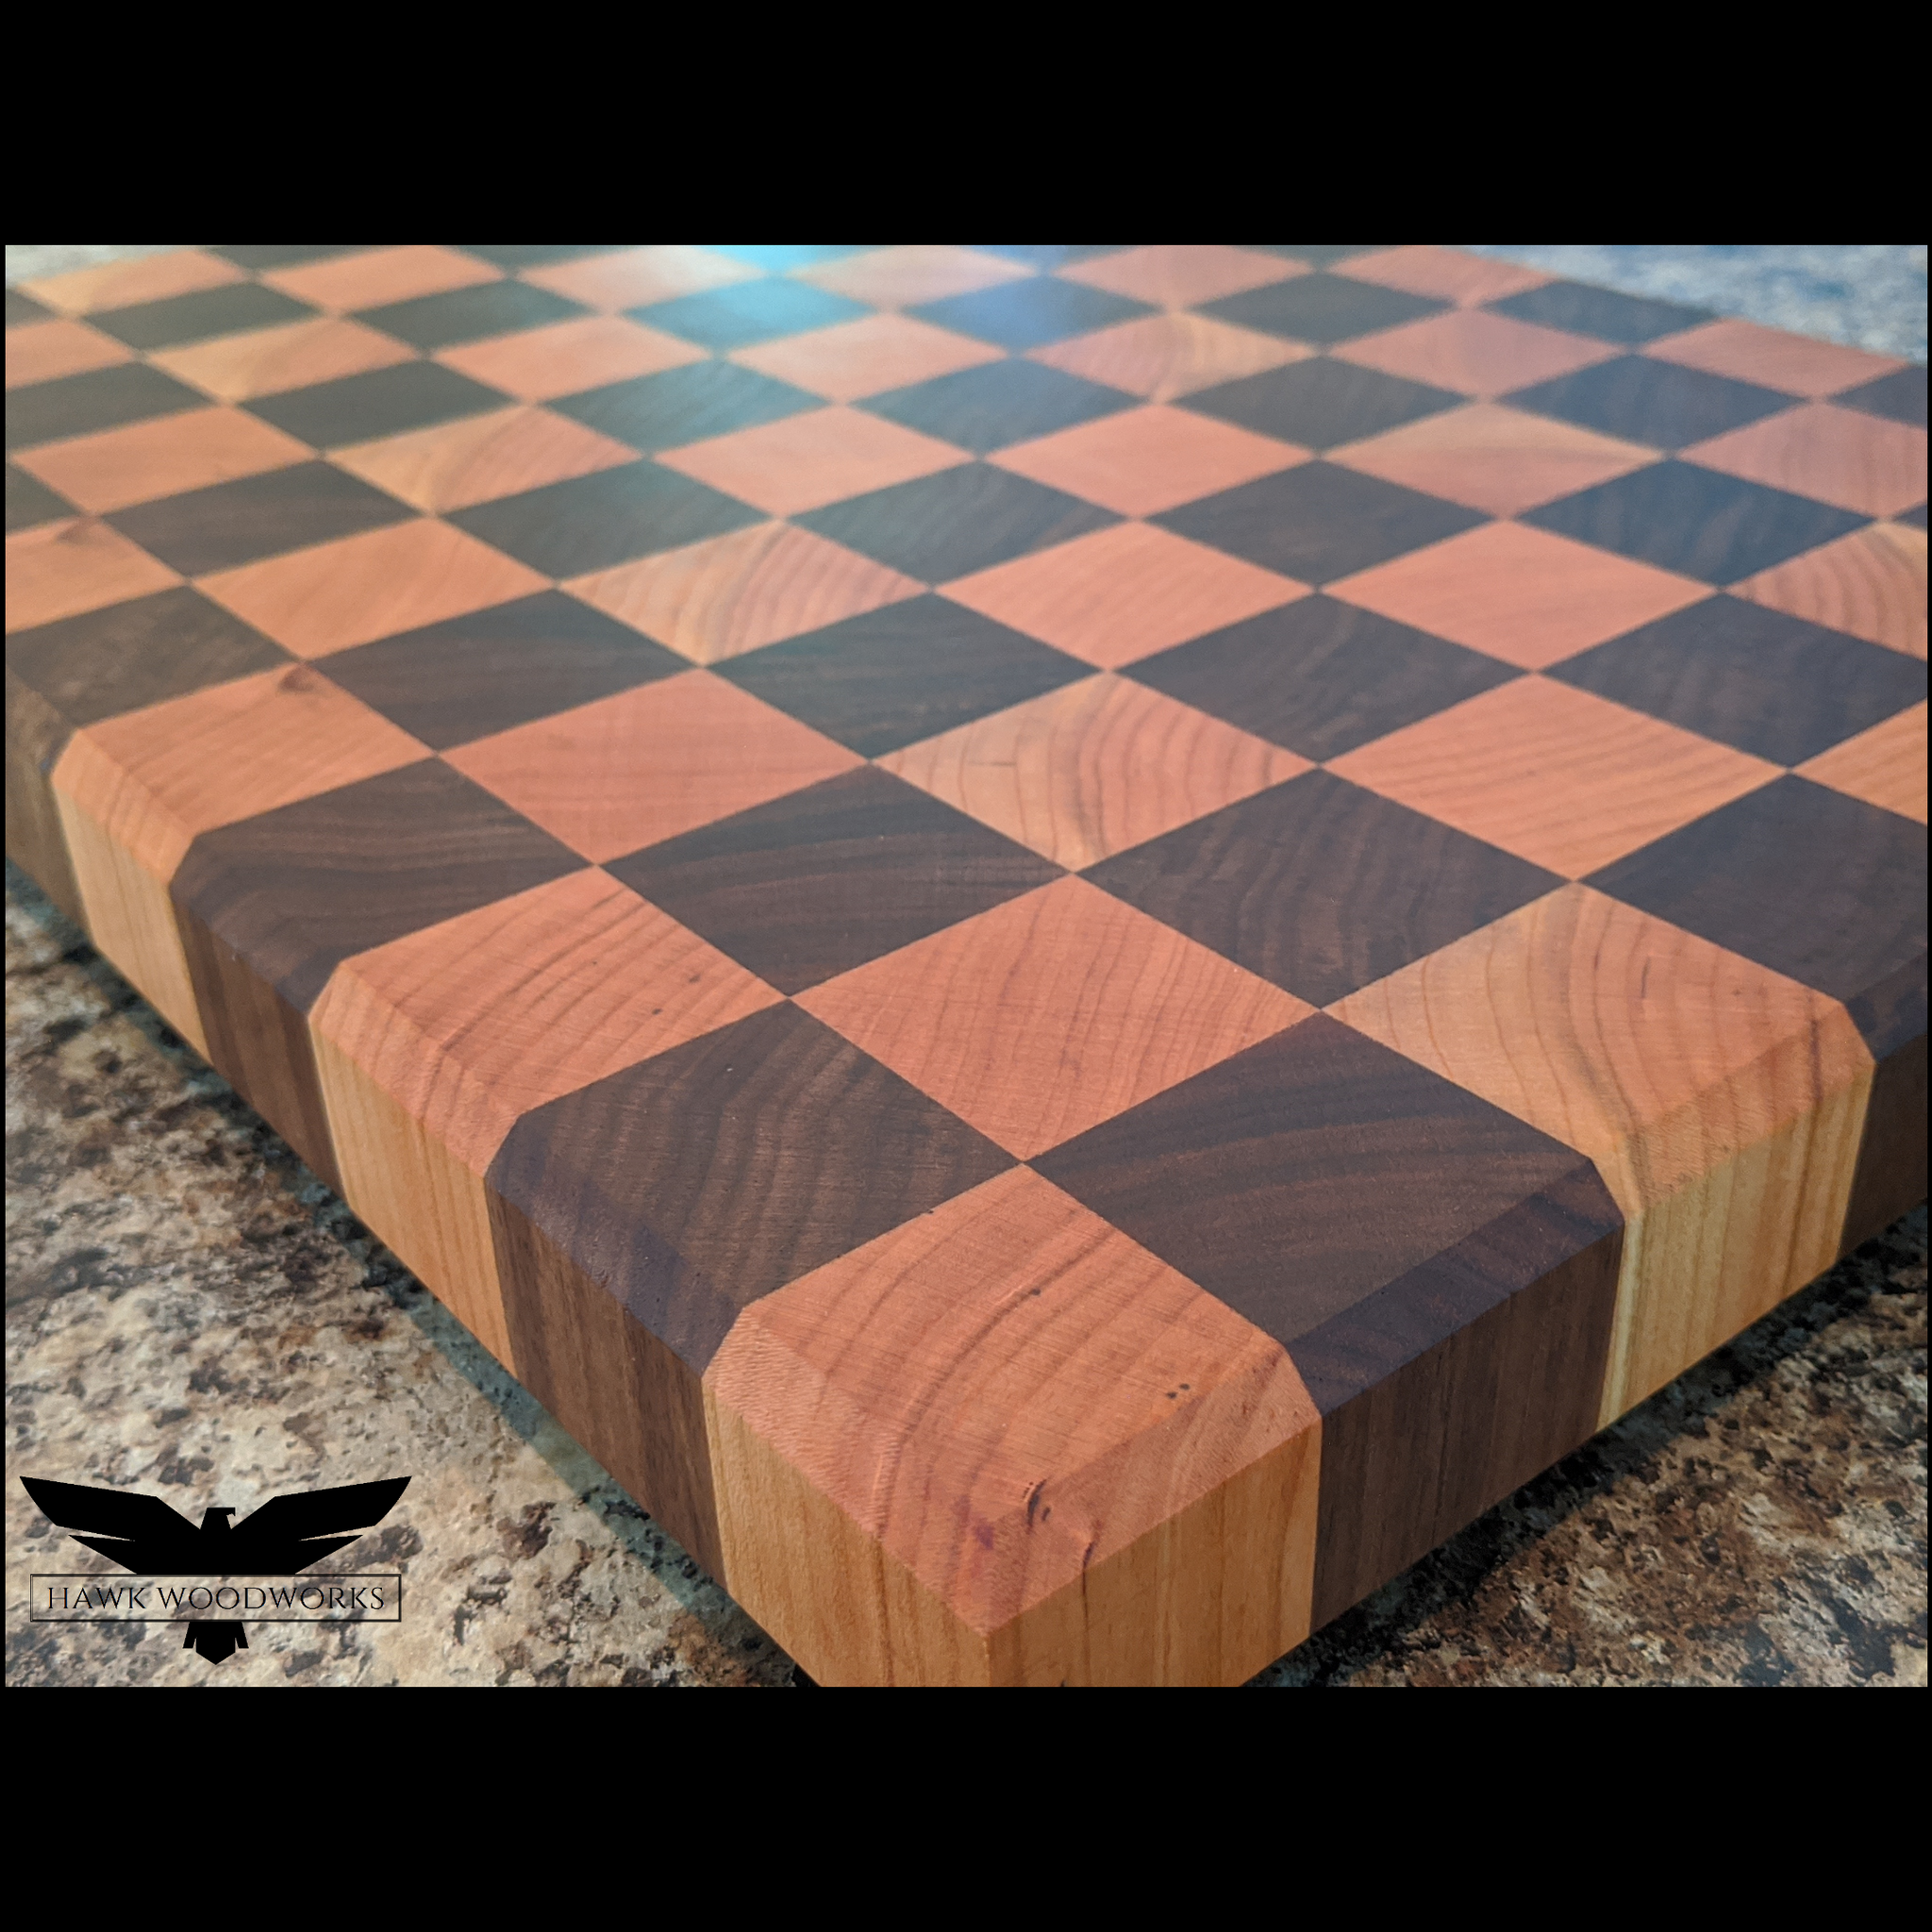 How to Make an End Grain Cutting Board with Salvaged Wood - This Old House